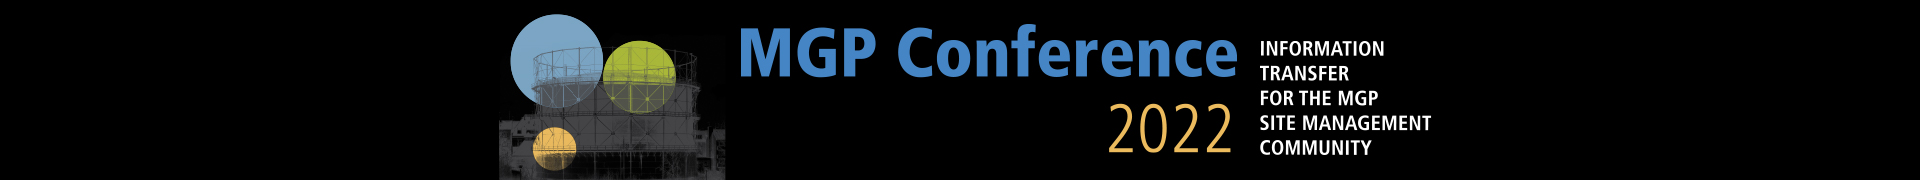 MGP Conference 2022 Event Banner